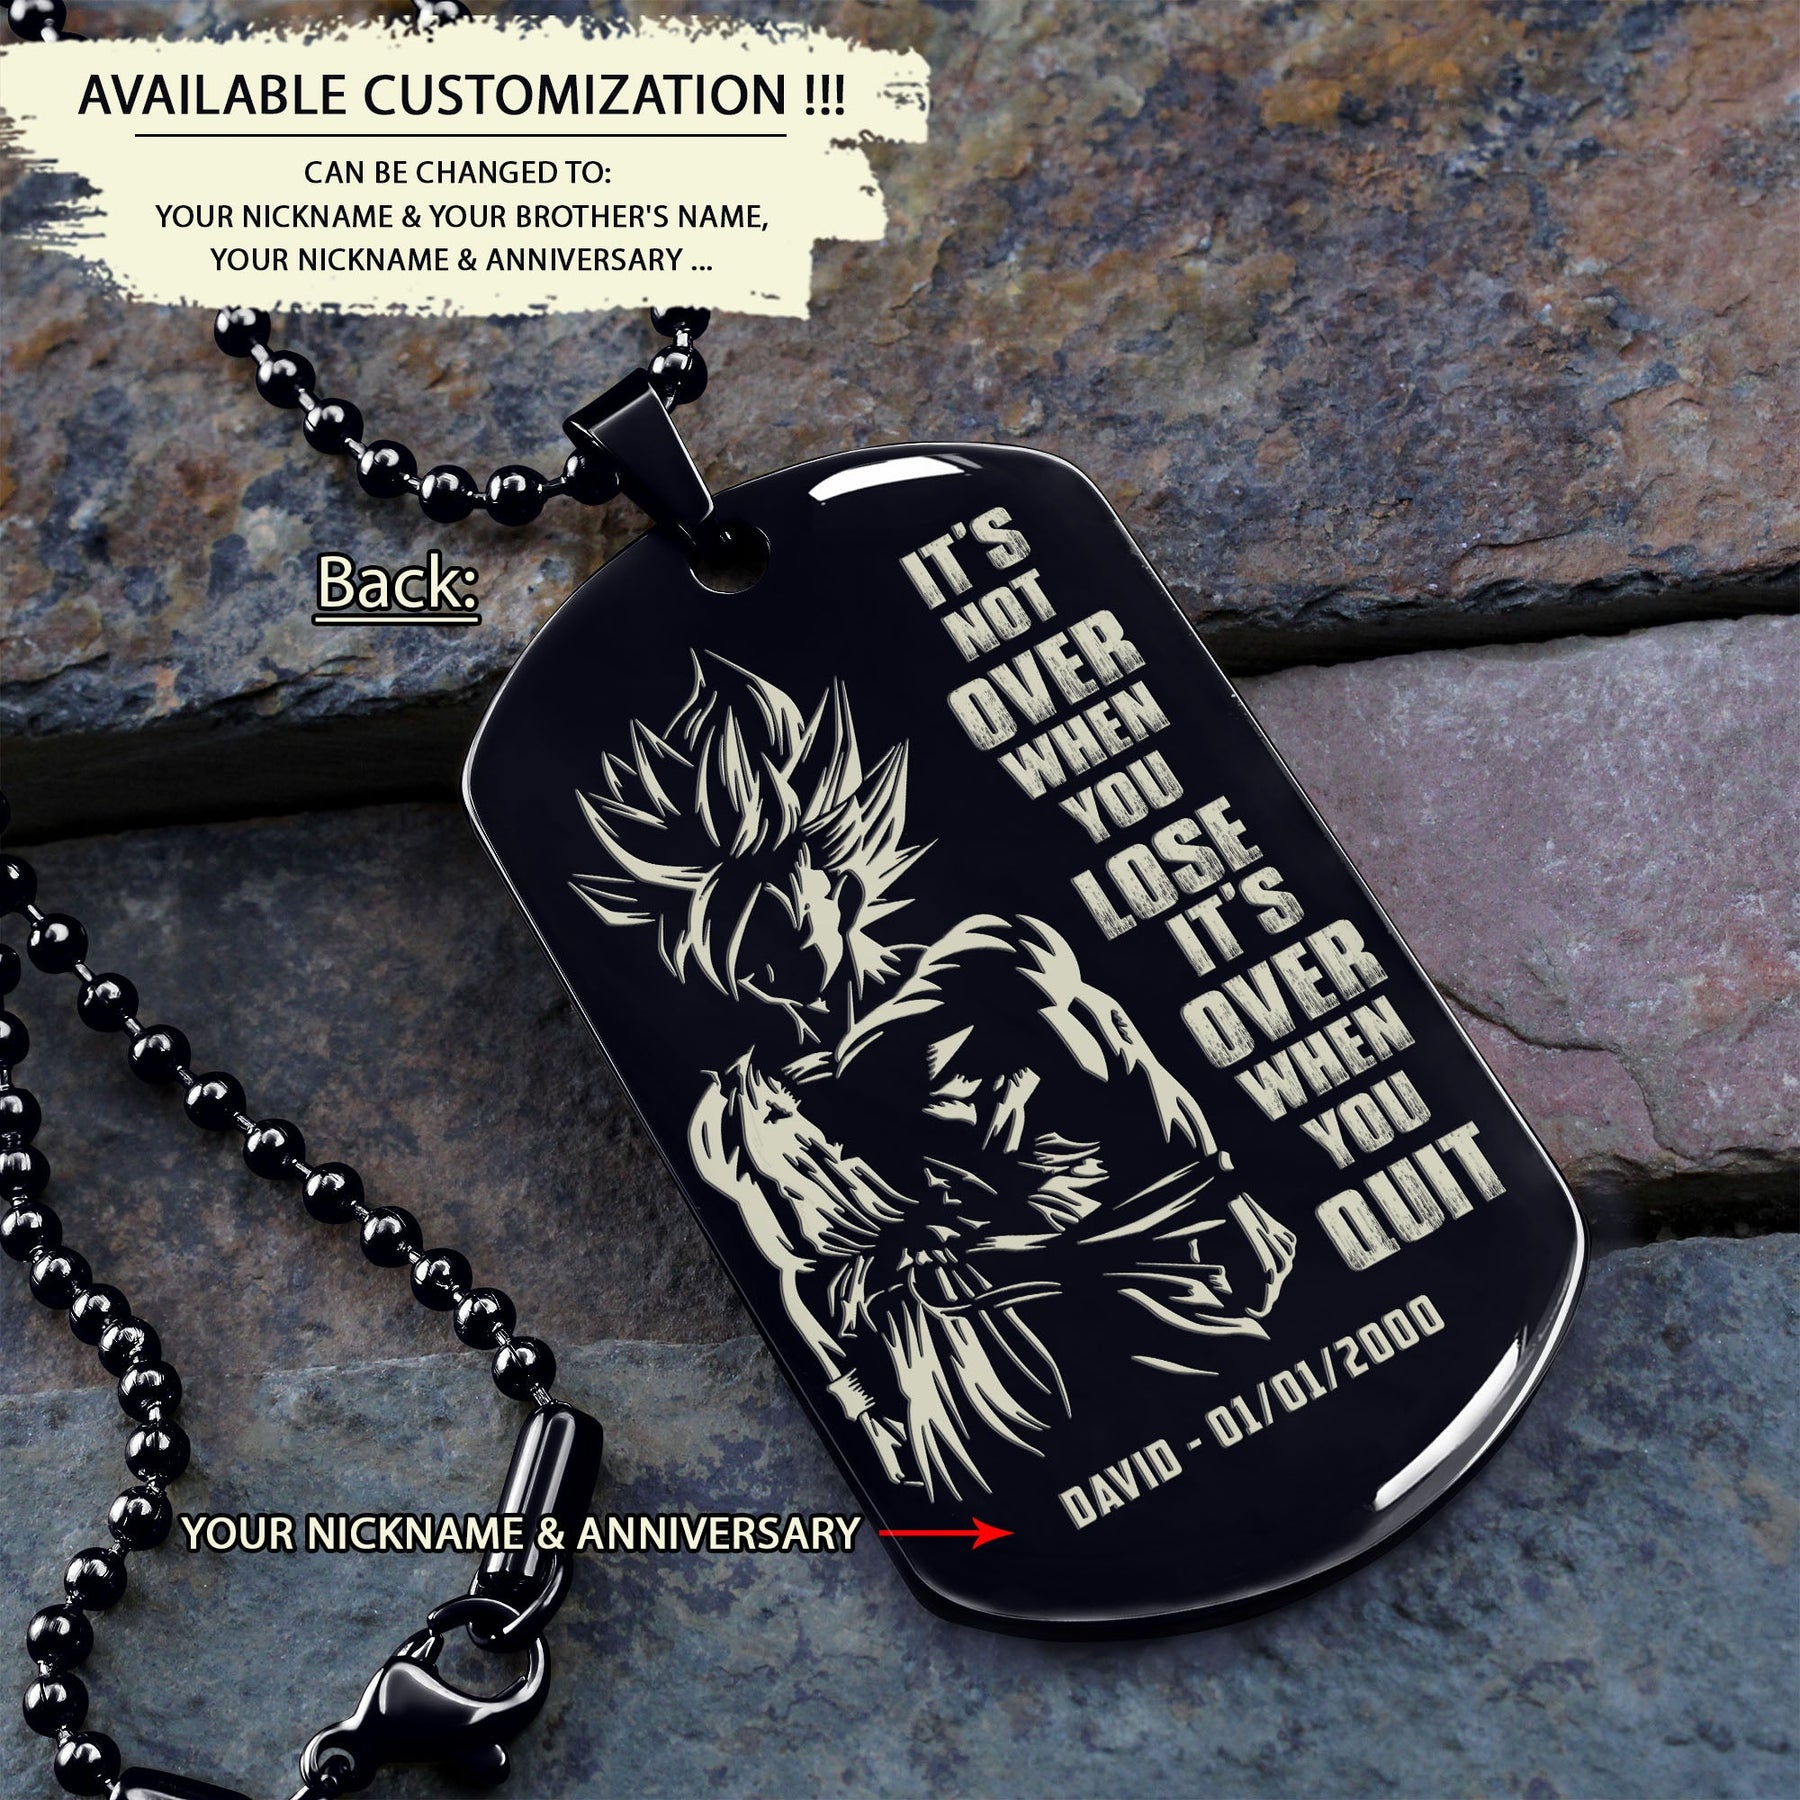 DRD024 - 5 Personal Customization Options - Call On Me Brother - It's Not Over When You Lose - Engrave Double Black Dog Tag